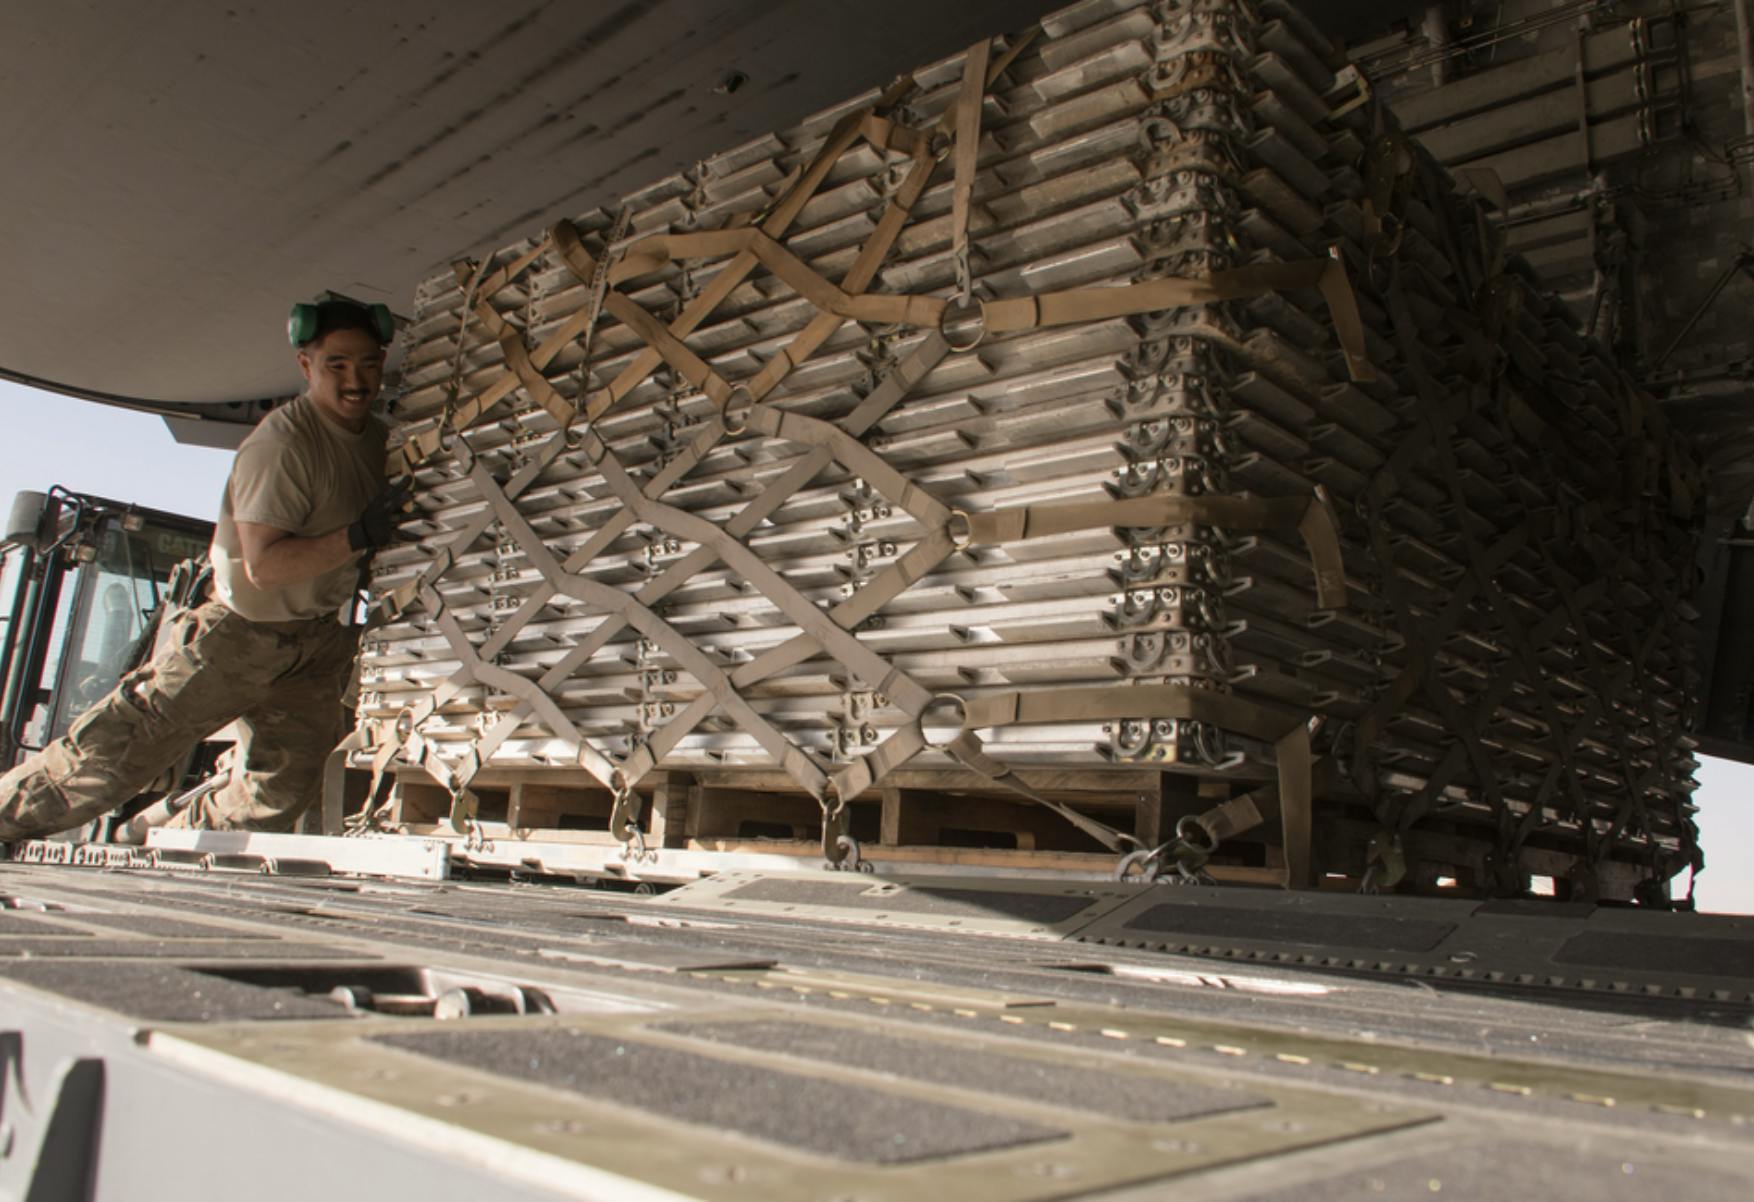 Soldier in fatigues pushing a pallet of strapped goods up a plan's ramp. Cyber Supply Chain Risks, cyber logistics, supply chain, supply chain security, cyber supply chain risk assessment, cyber supply chain management.